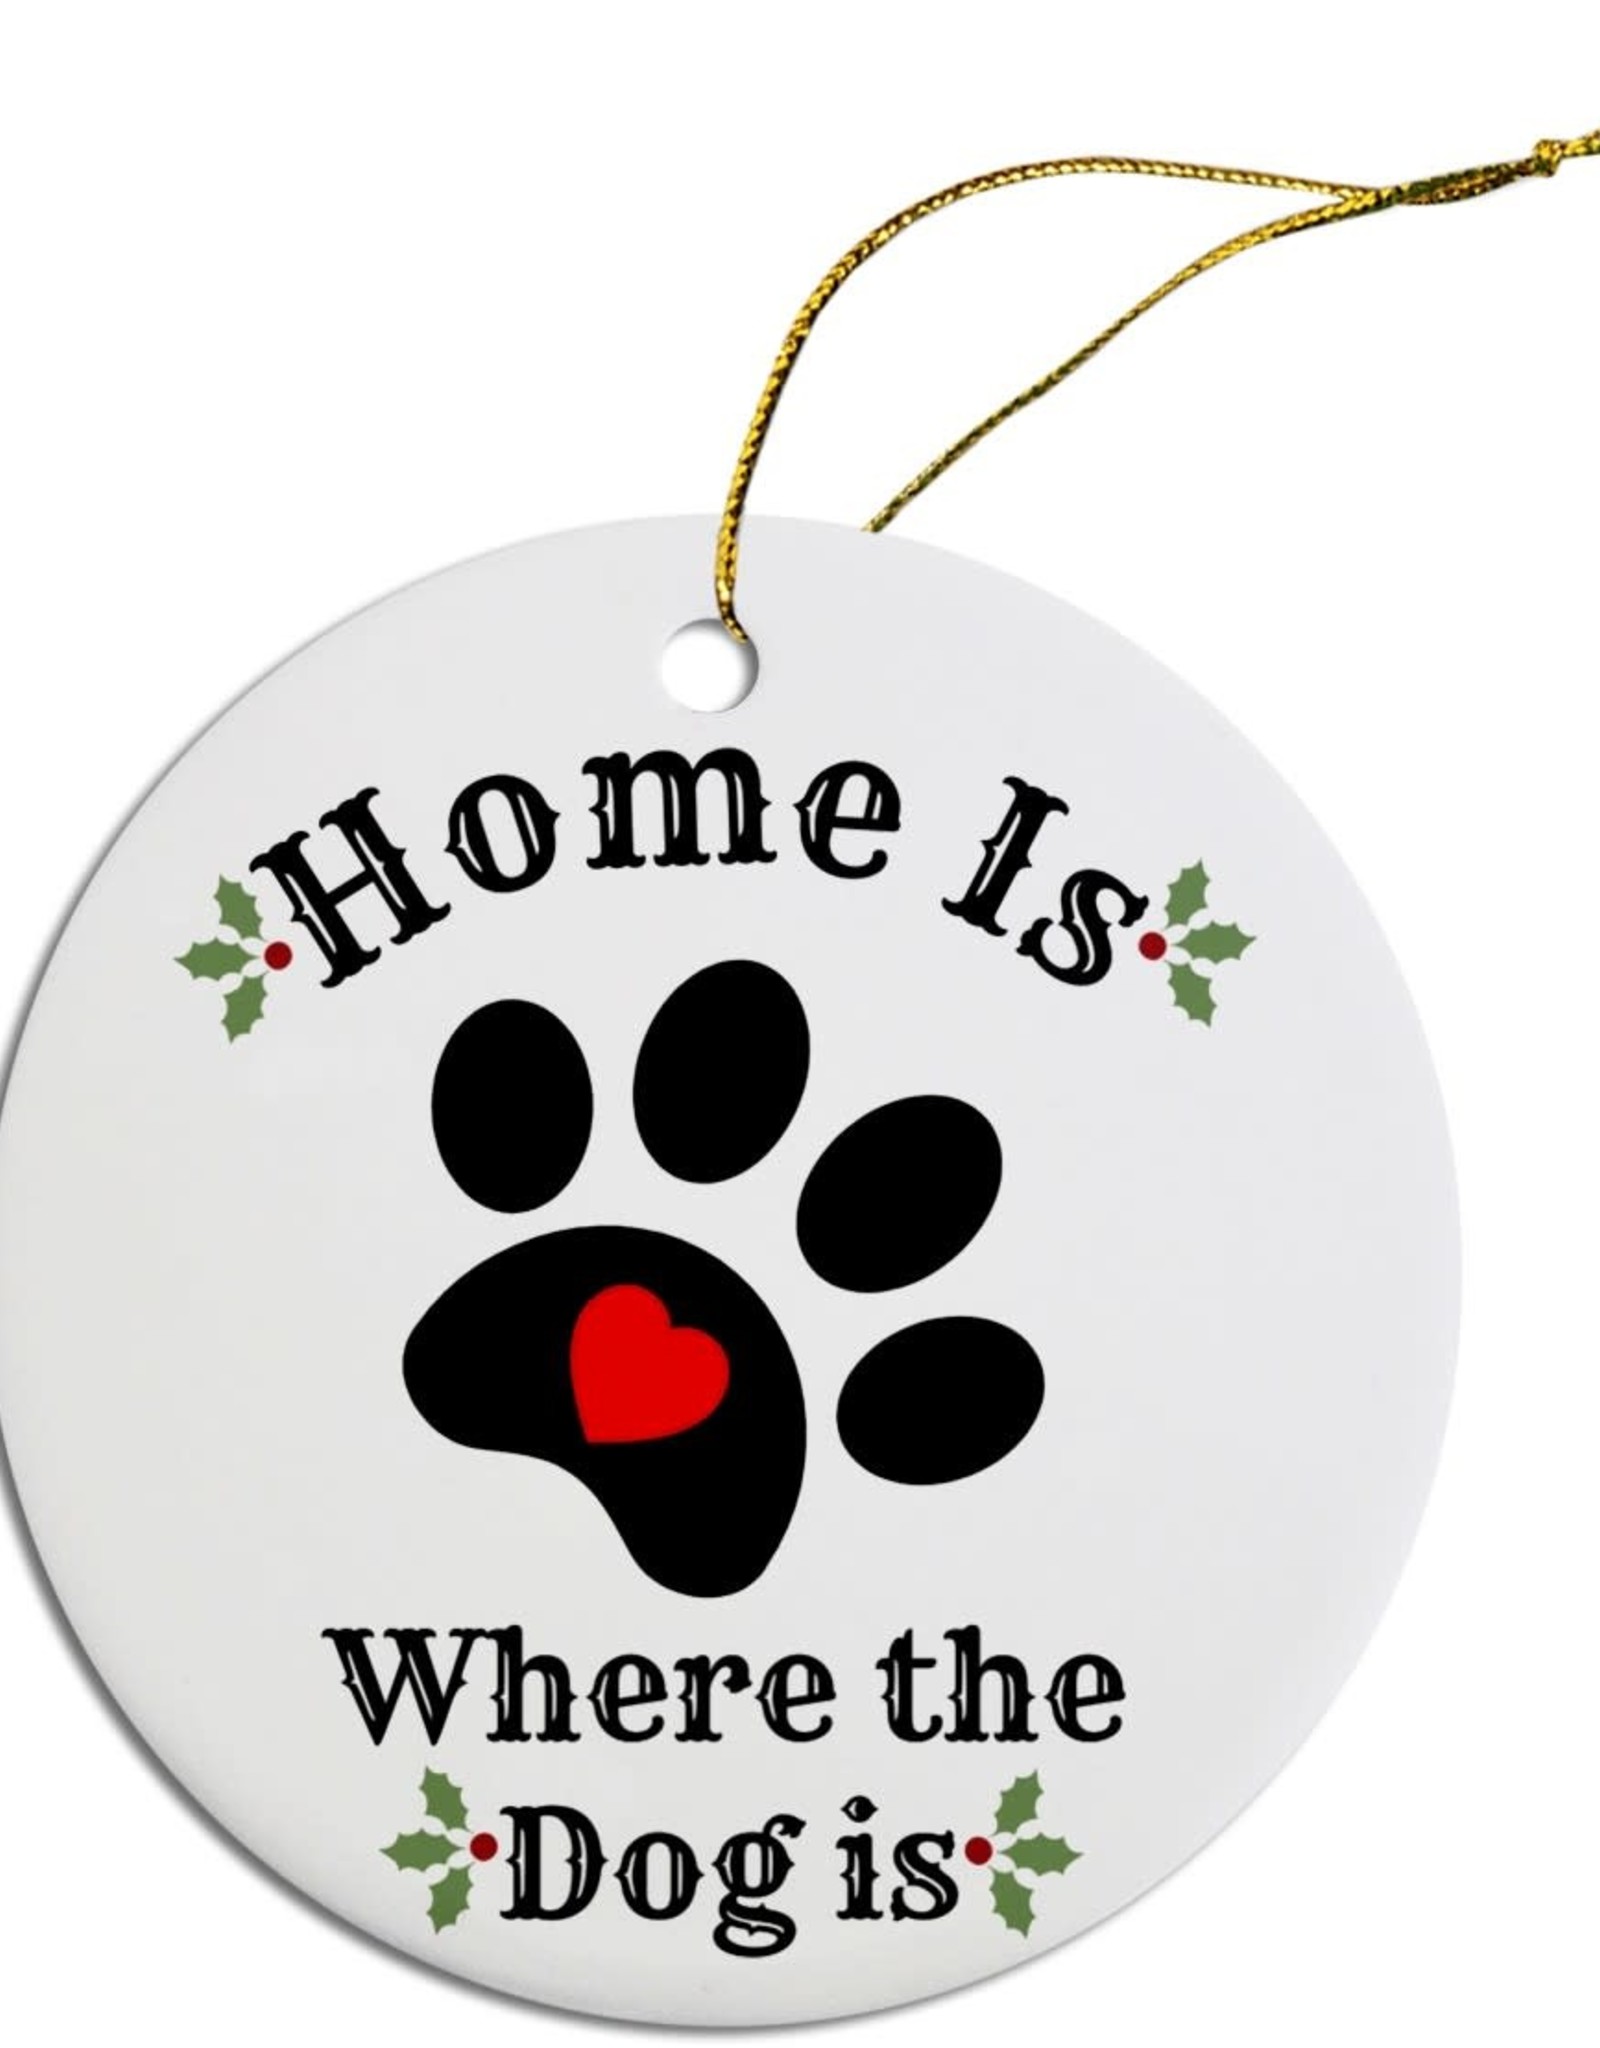 Home is Where the Dog Is Ornament